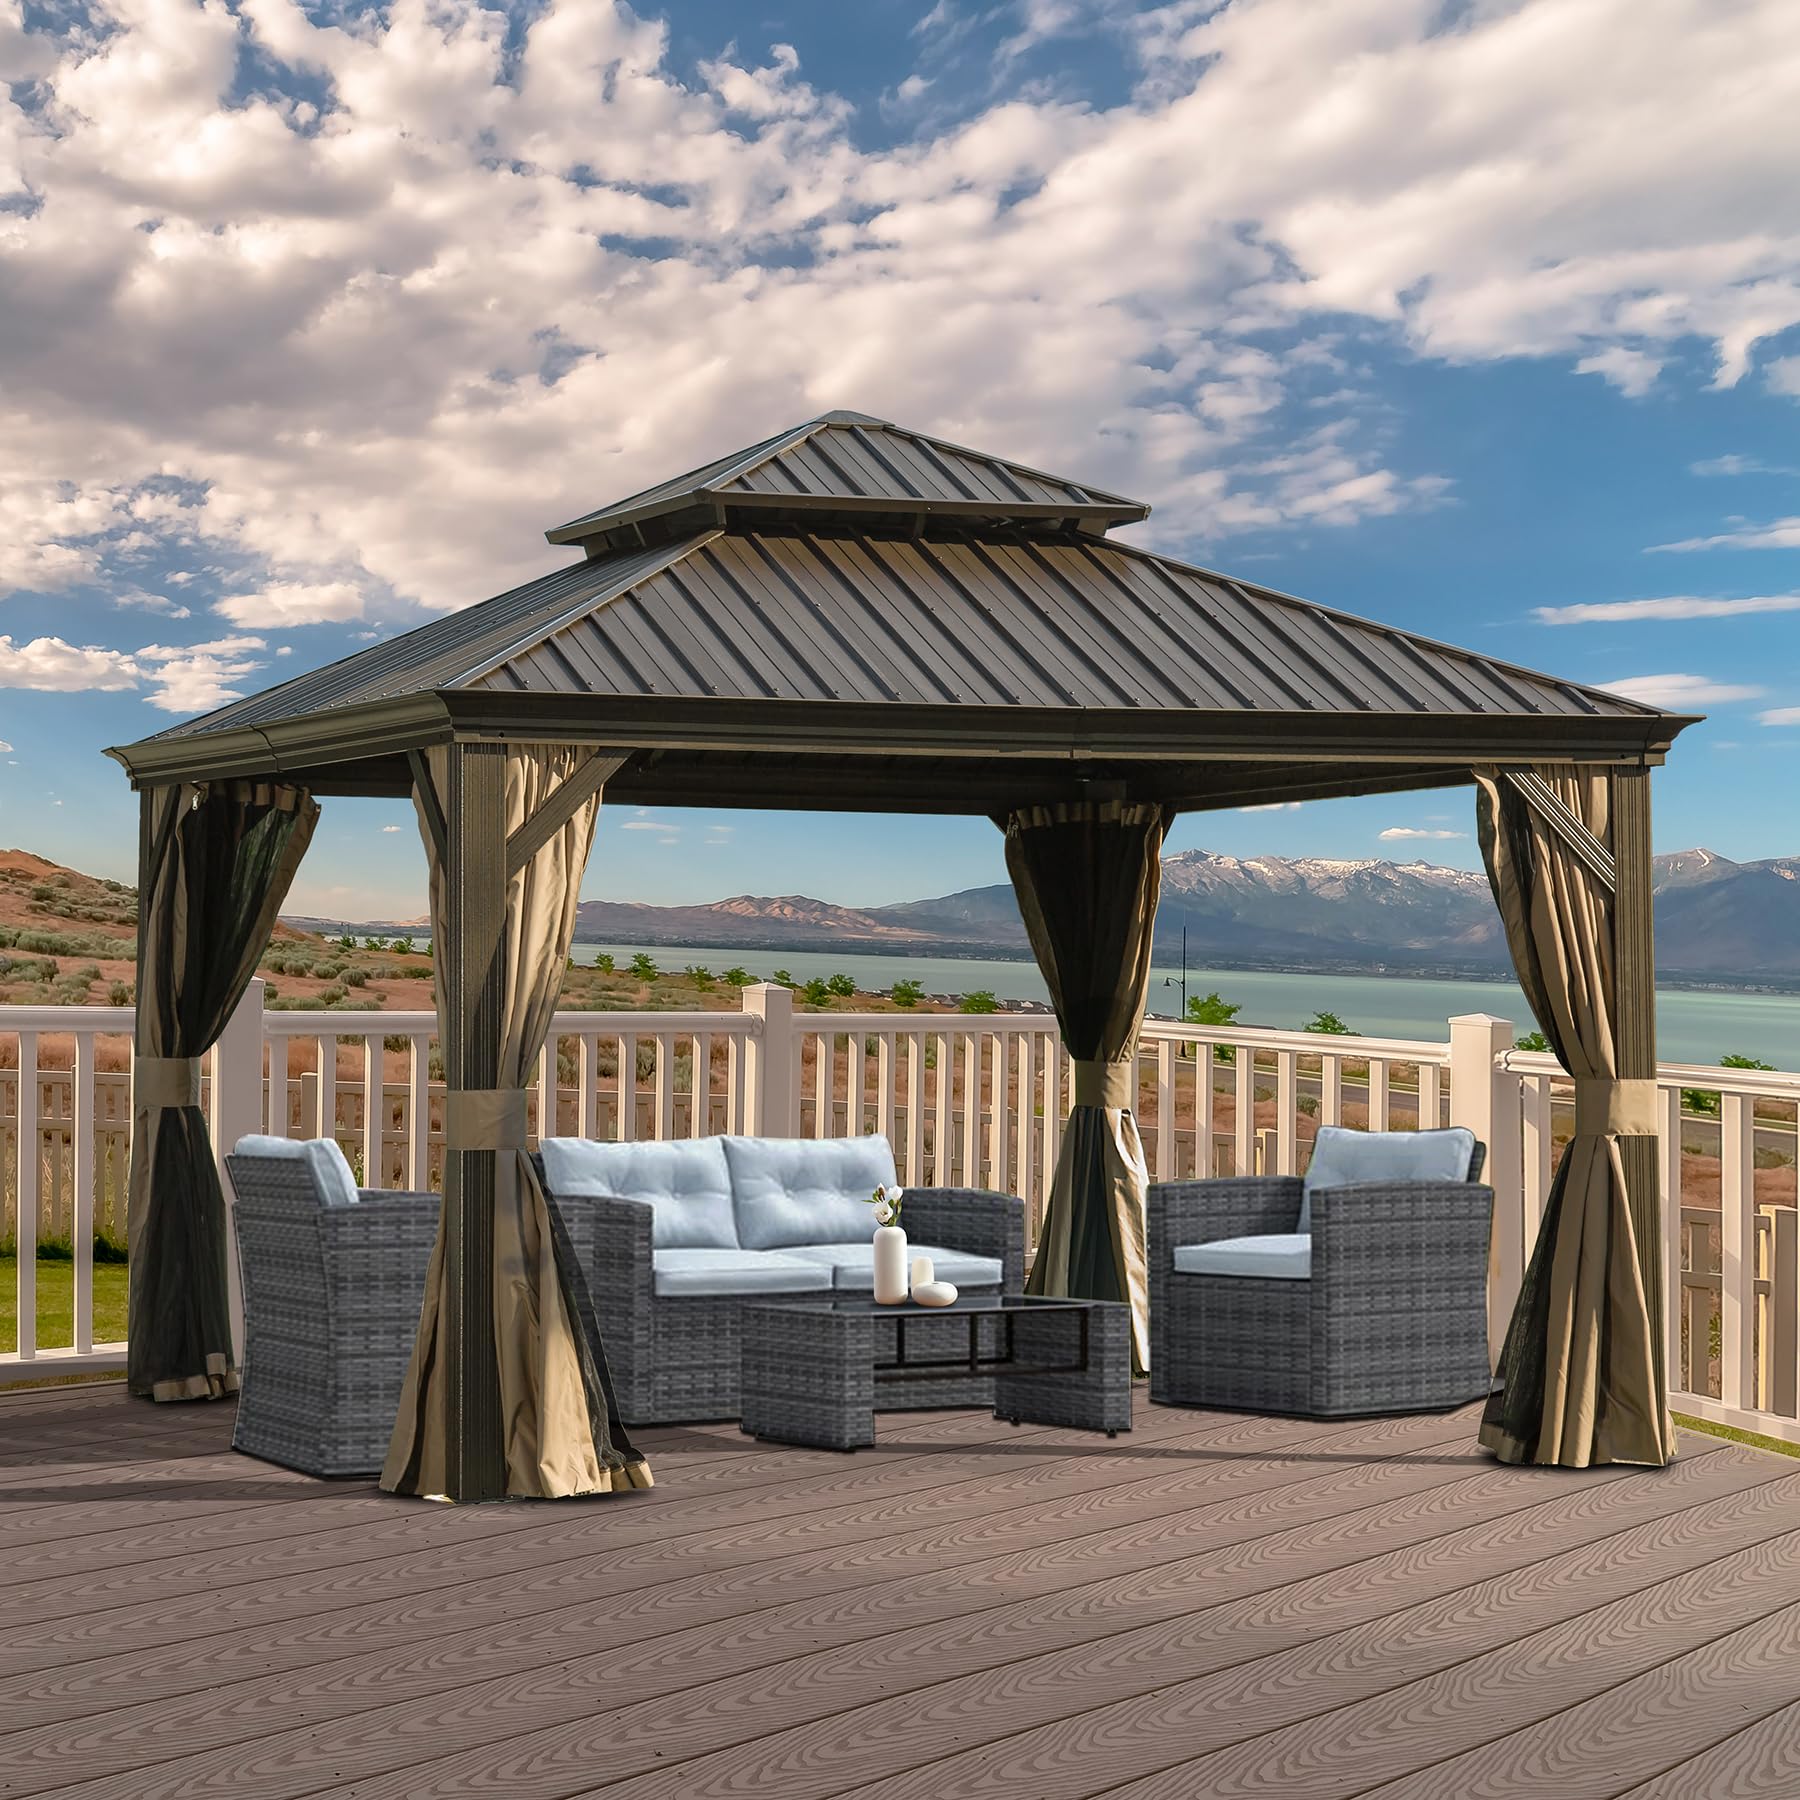 Domi Outdoor Living 12’ X 12’ Hardtop Gazebo, Outdoor Aluminum Frame Canopy with Galvanized Steel Double Roof, Outdoor Permanent Metal Pavilion with Curtains and Netting for Patio, Backyard and Lawn